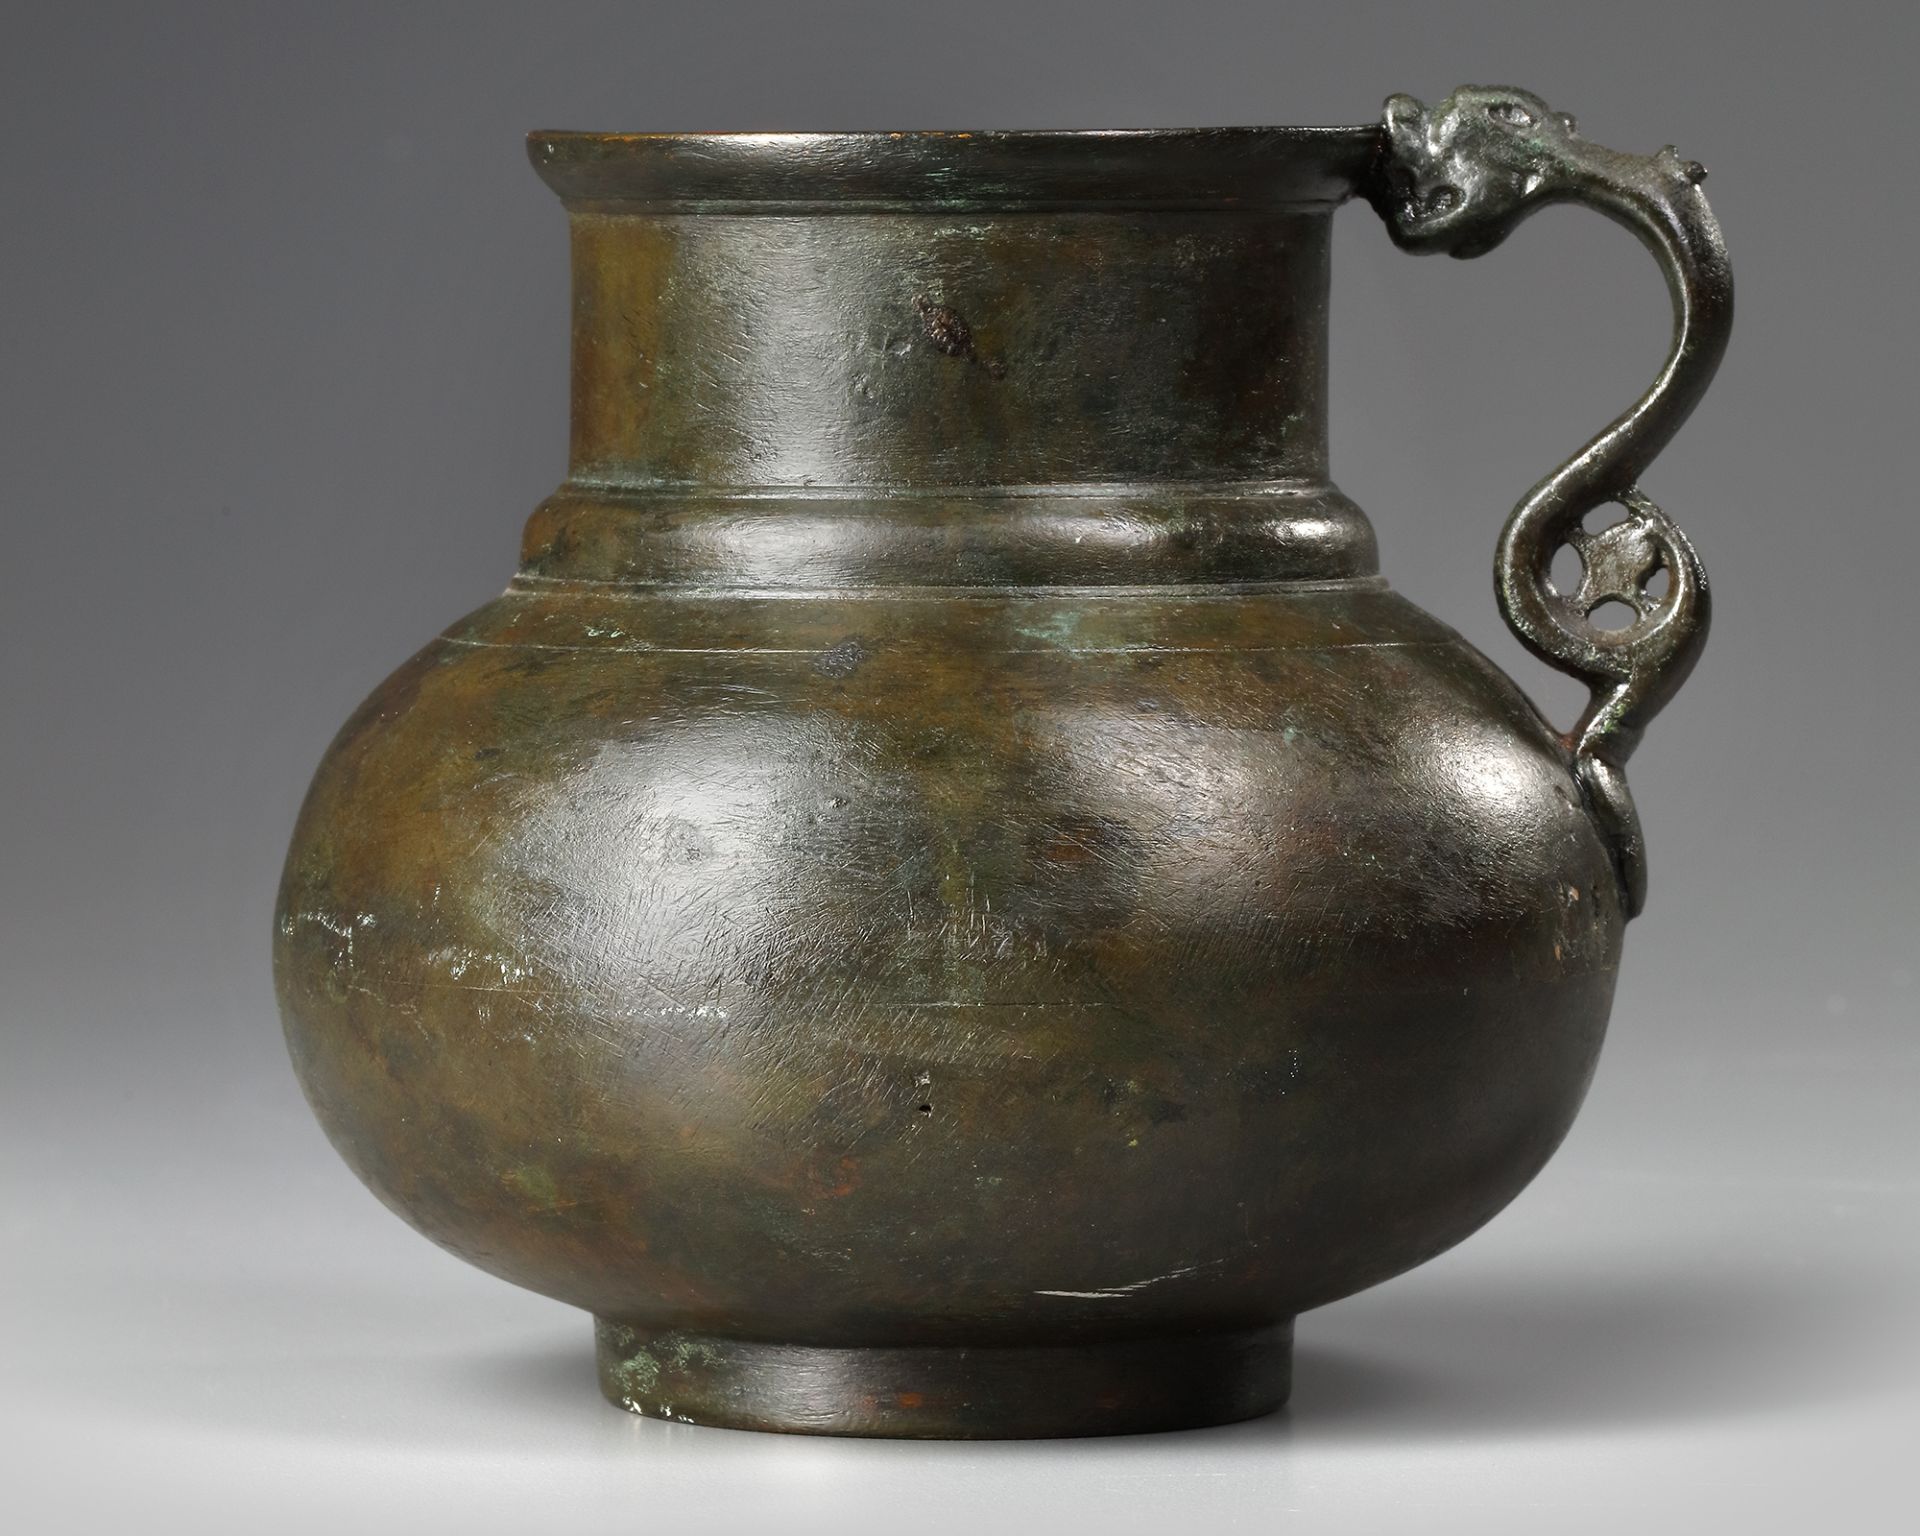 A TIMURID DRAGON-HANDLED JUG, CENTRAL ASIA, LATE 14TH- EARLY 15TH CENTURY - Image 2 of 6